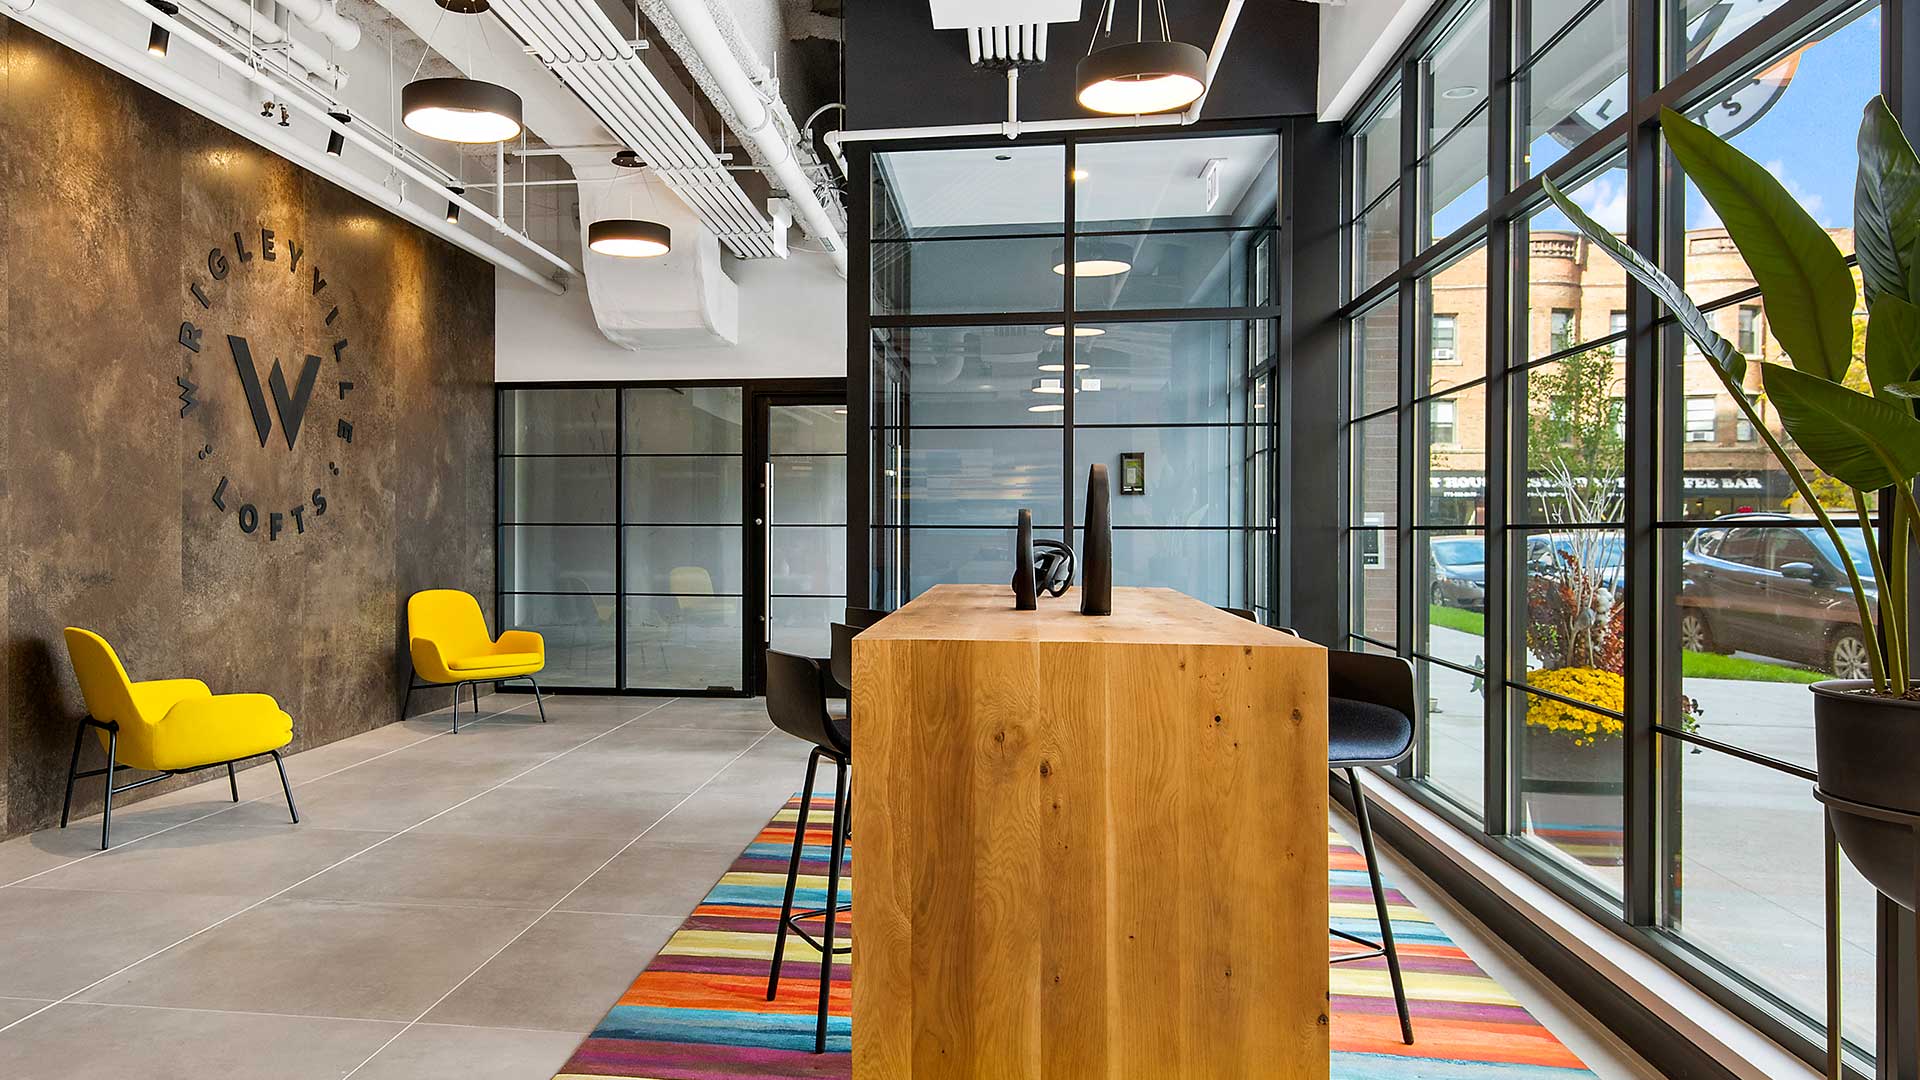 Looking across a high-top table in the lobby at Wrigleyville Lofts. The main entrance is behind with windows to the right and the logo wall to the left.